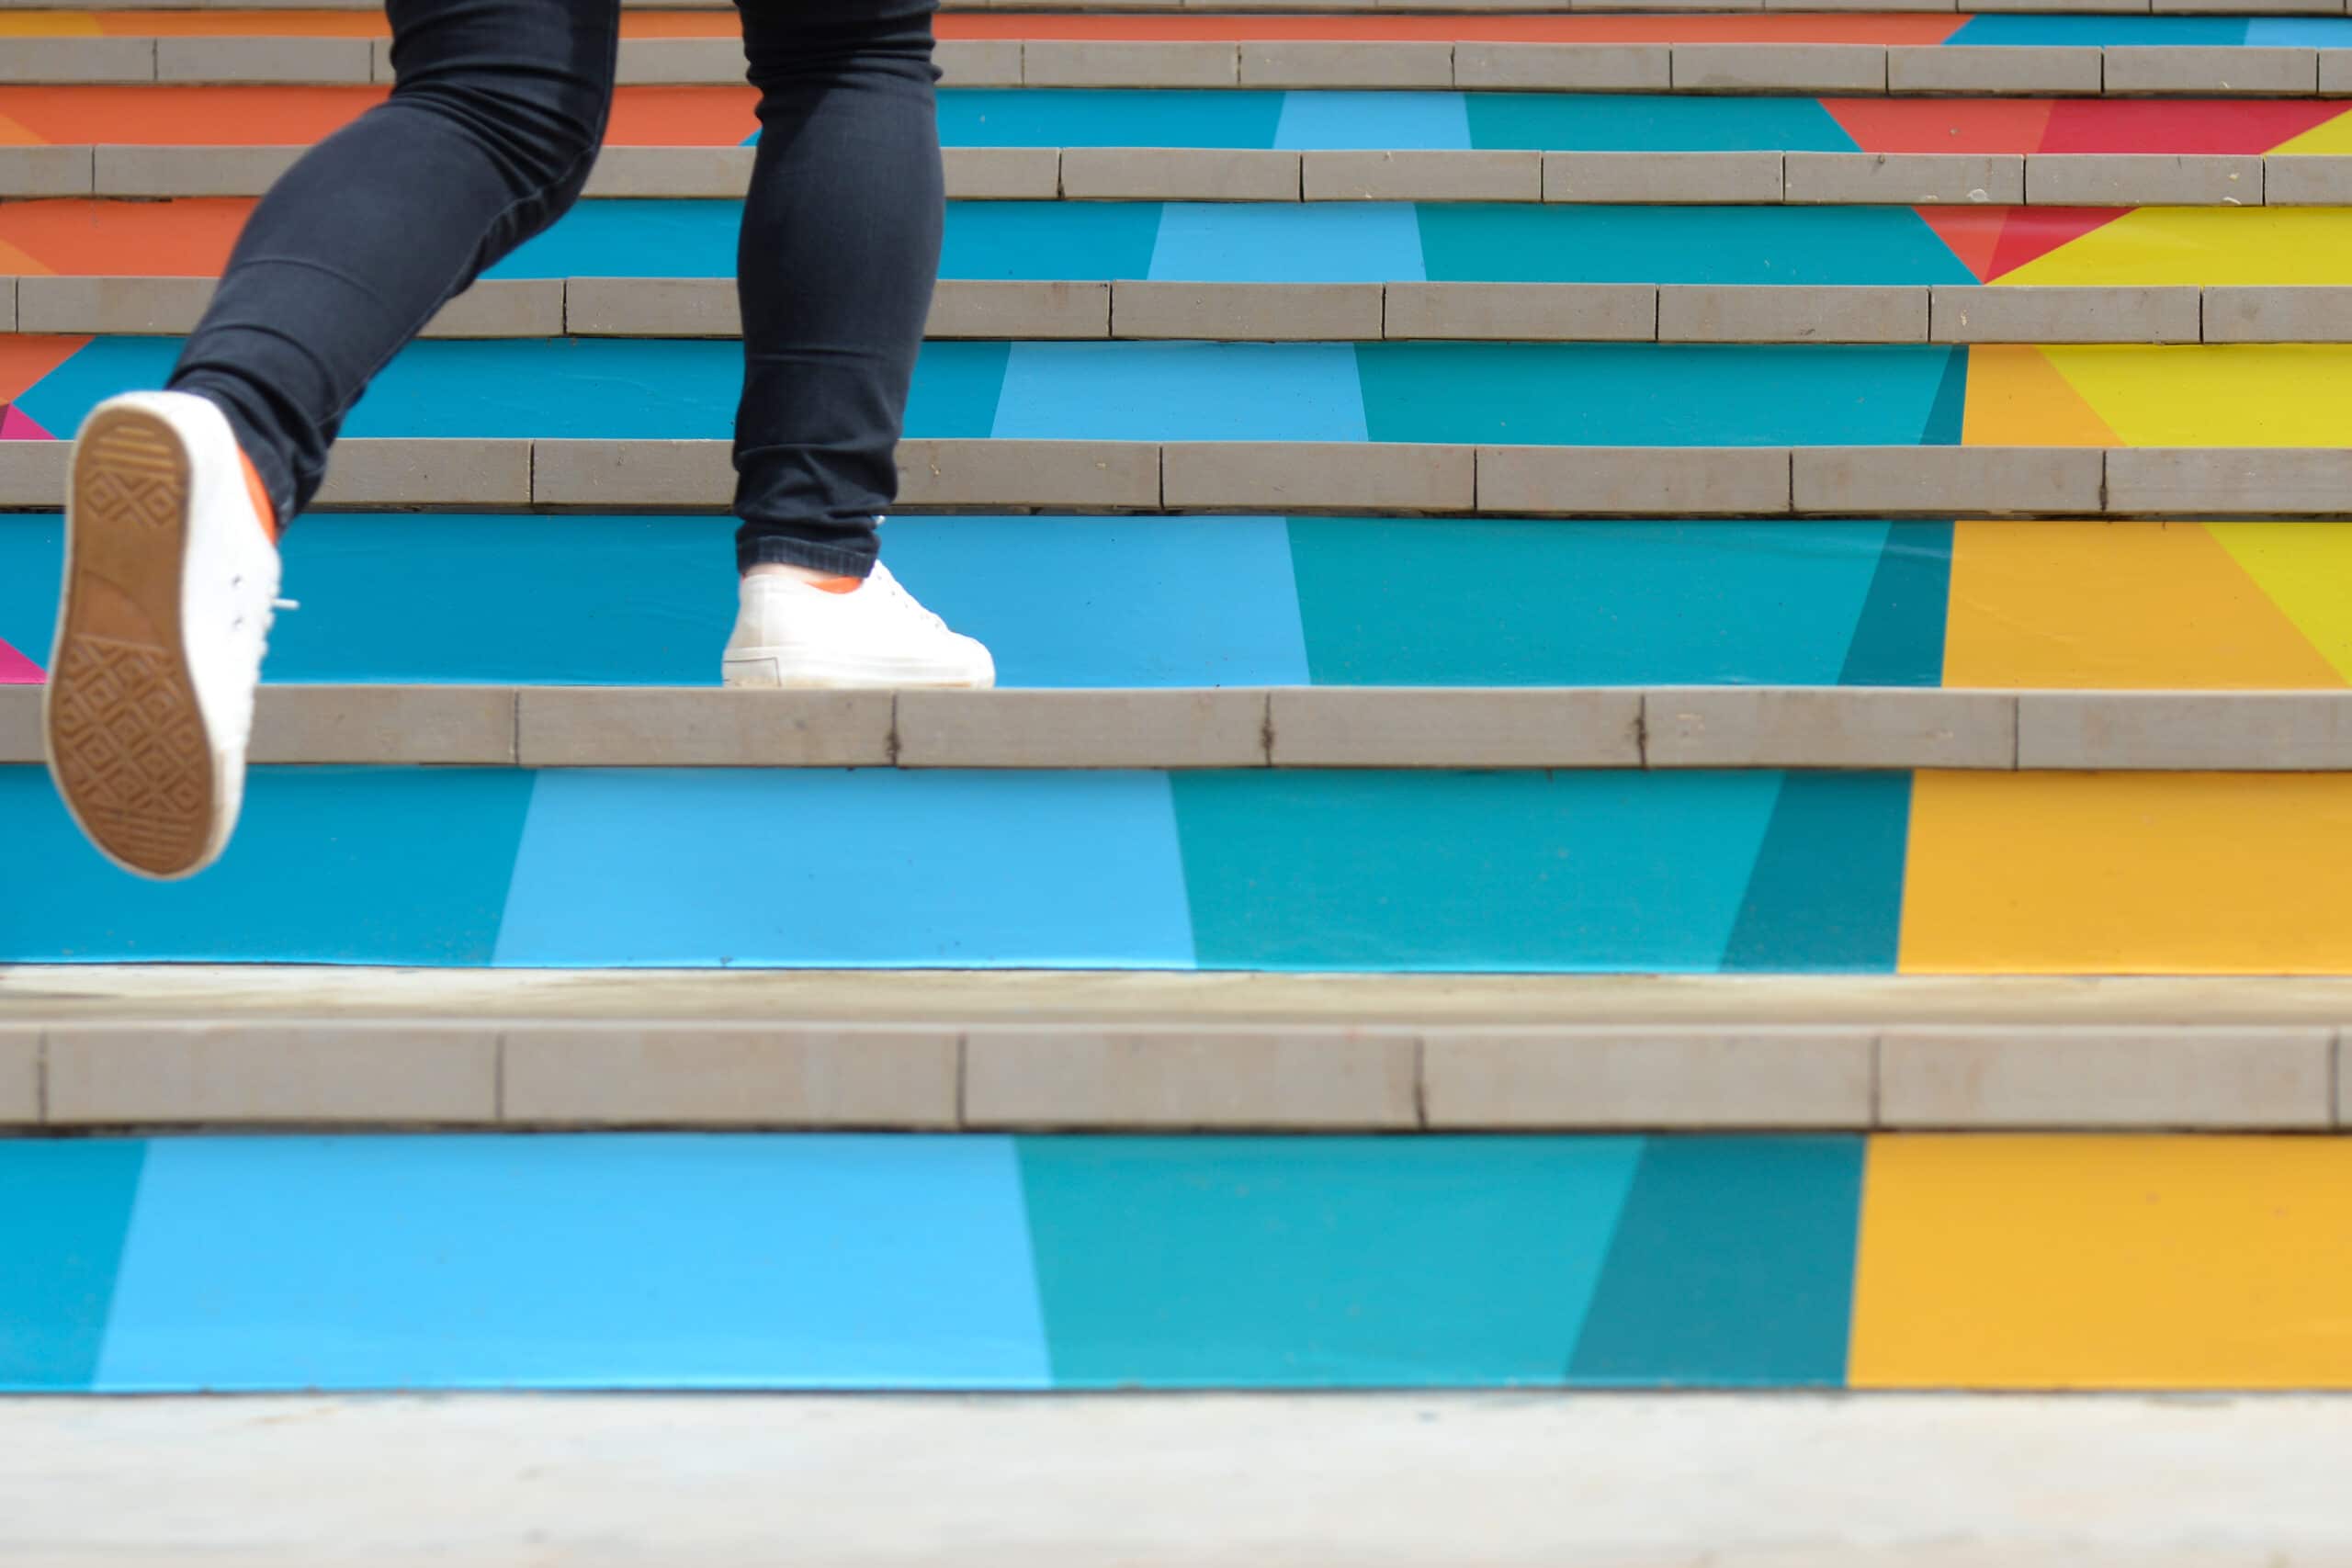 Lower part of legs wearing jeans and white tennis shoes, walking up multi-colored stairs.